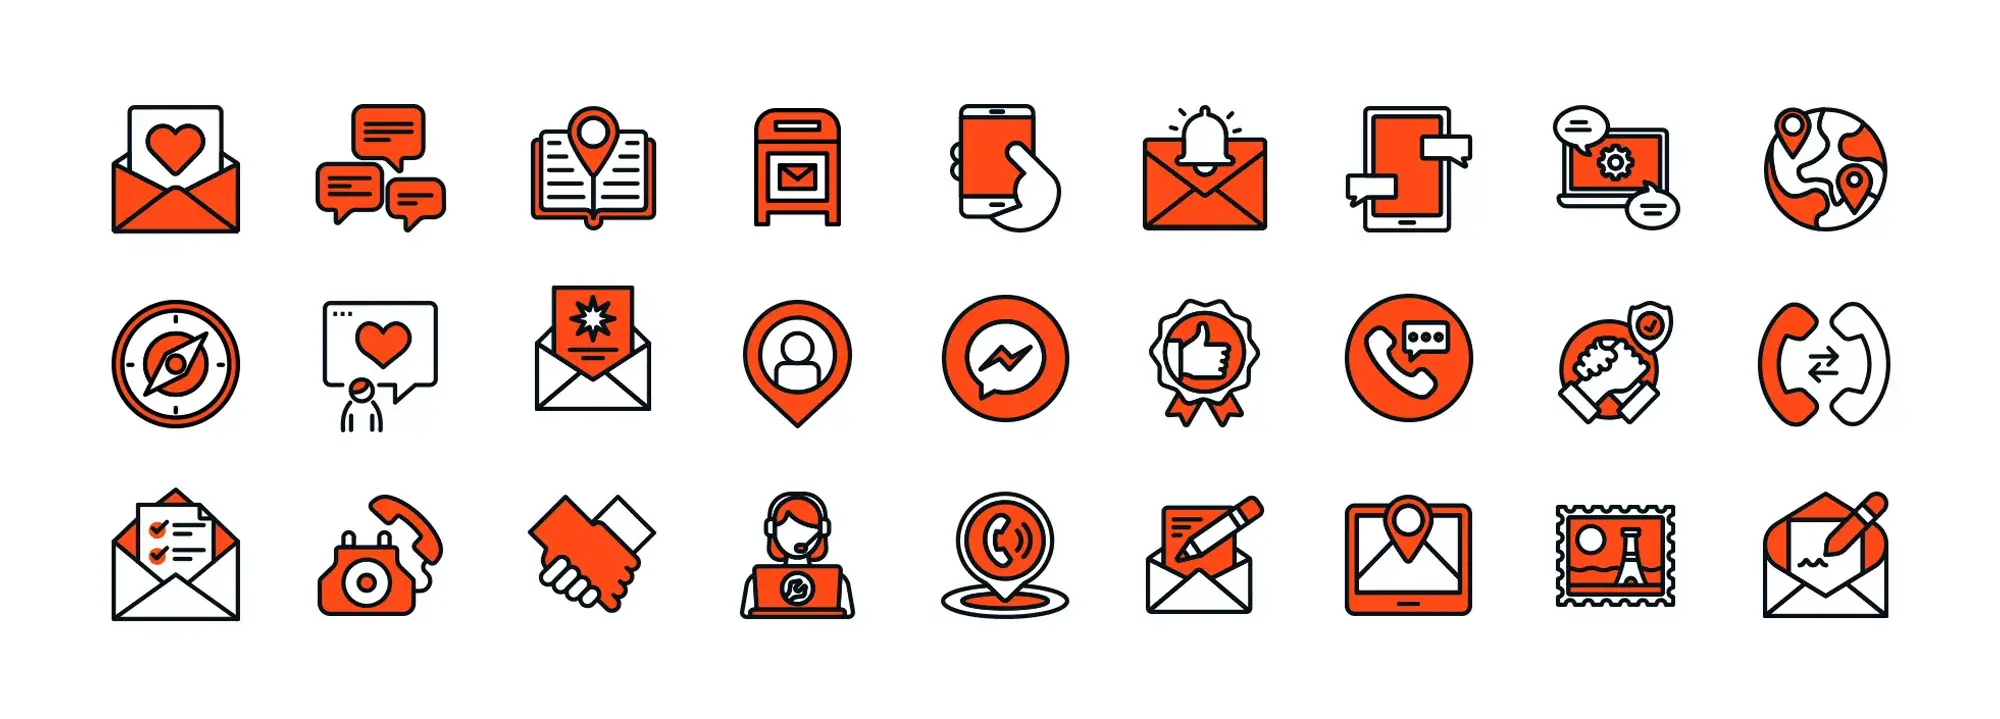 Wide range of free icons designed for WordPress, available for instant download